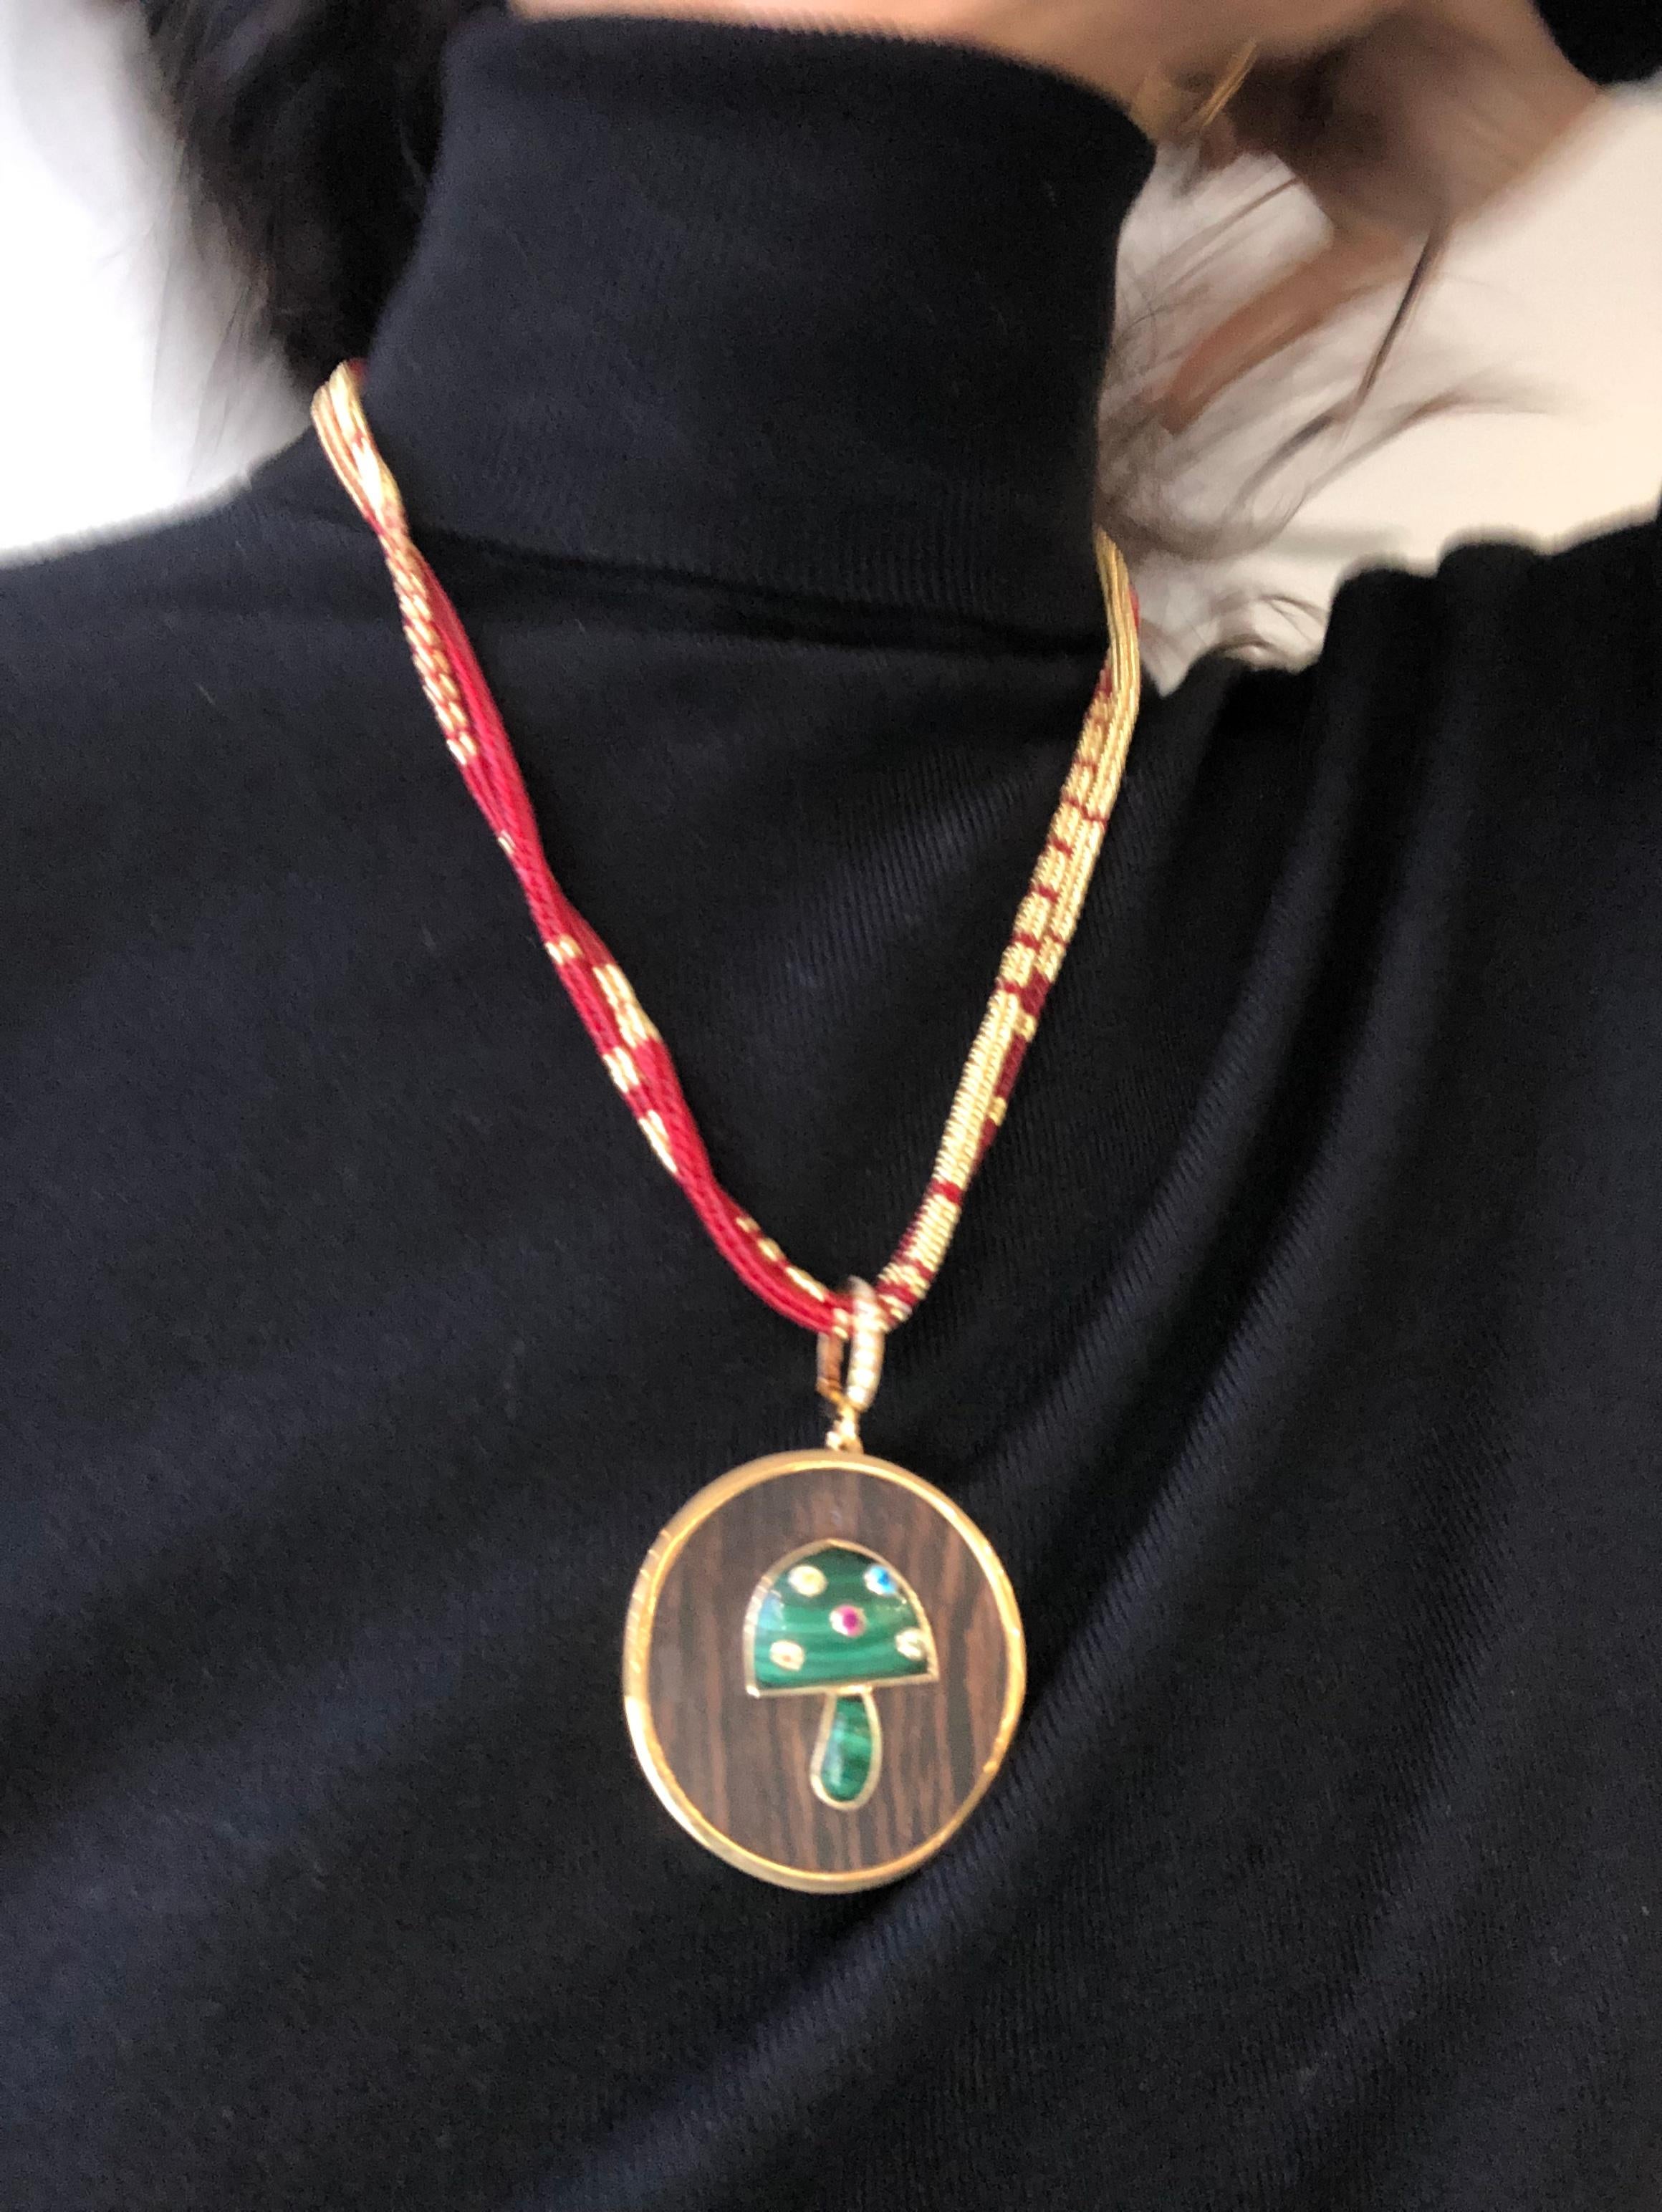 Contemporary Clarissa Bronfman Red Gold Alonso Necklace Gold Multi Stone Malachite Necklace  For Sale